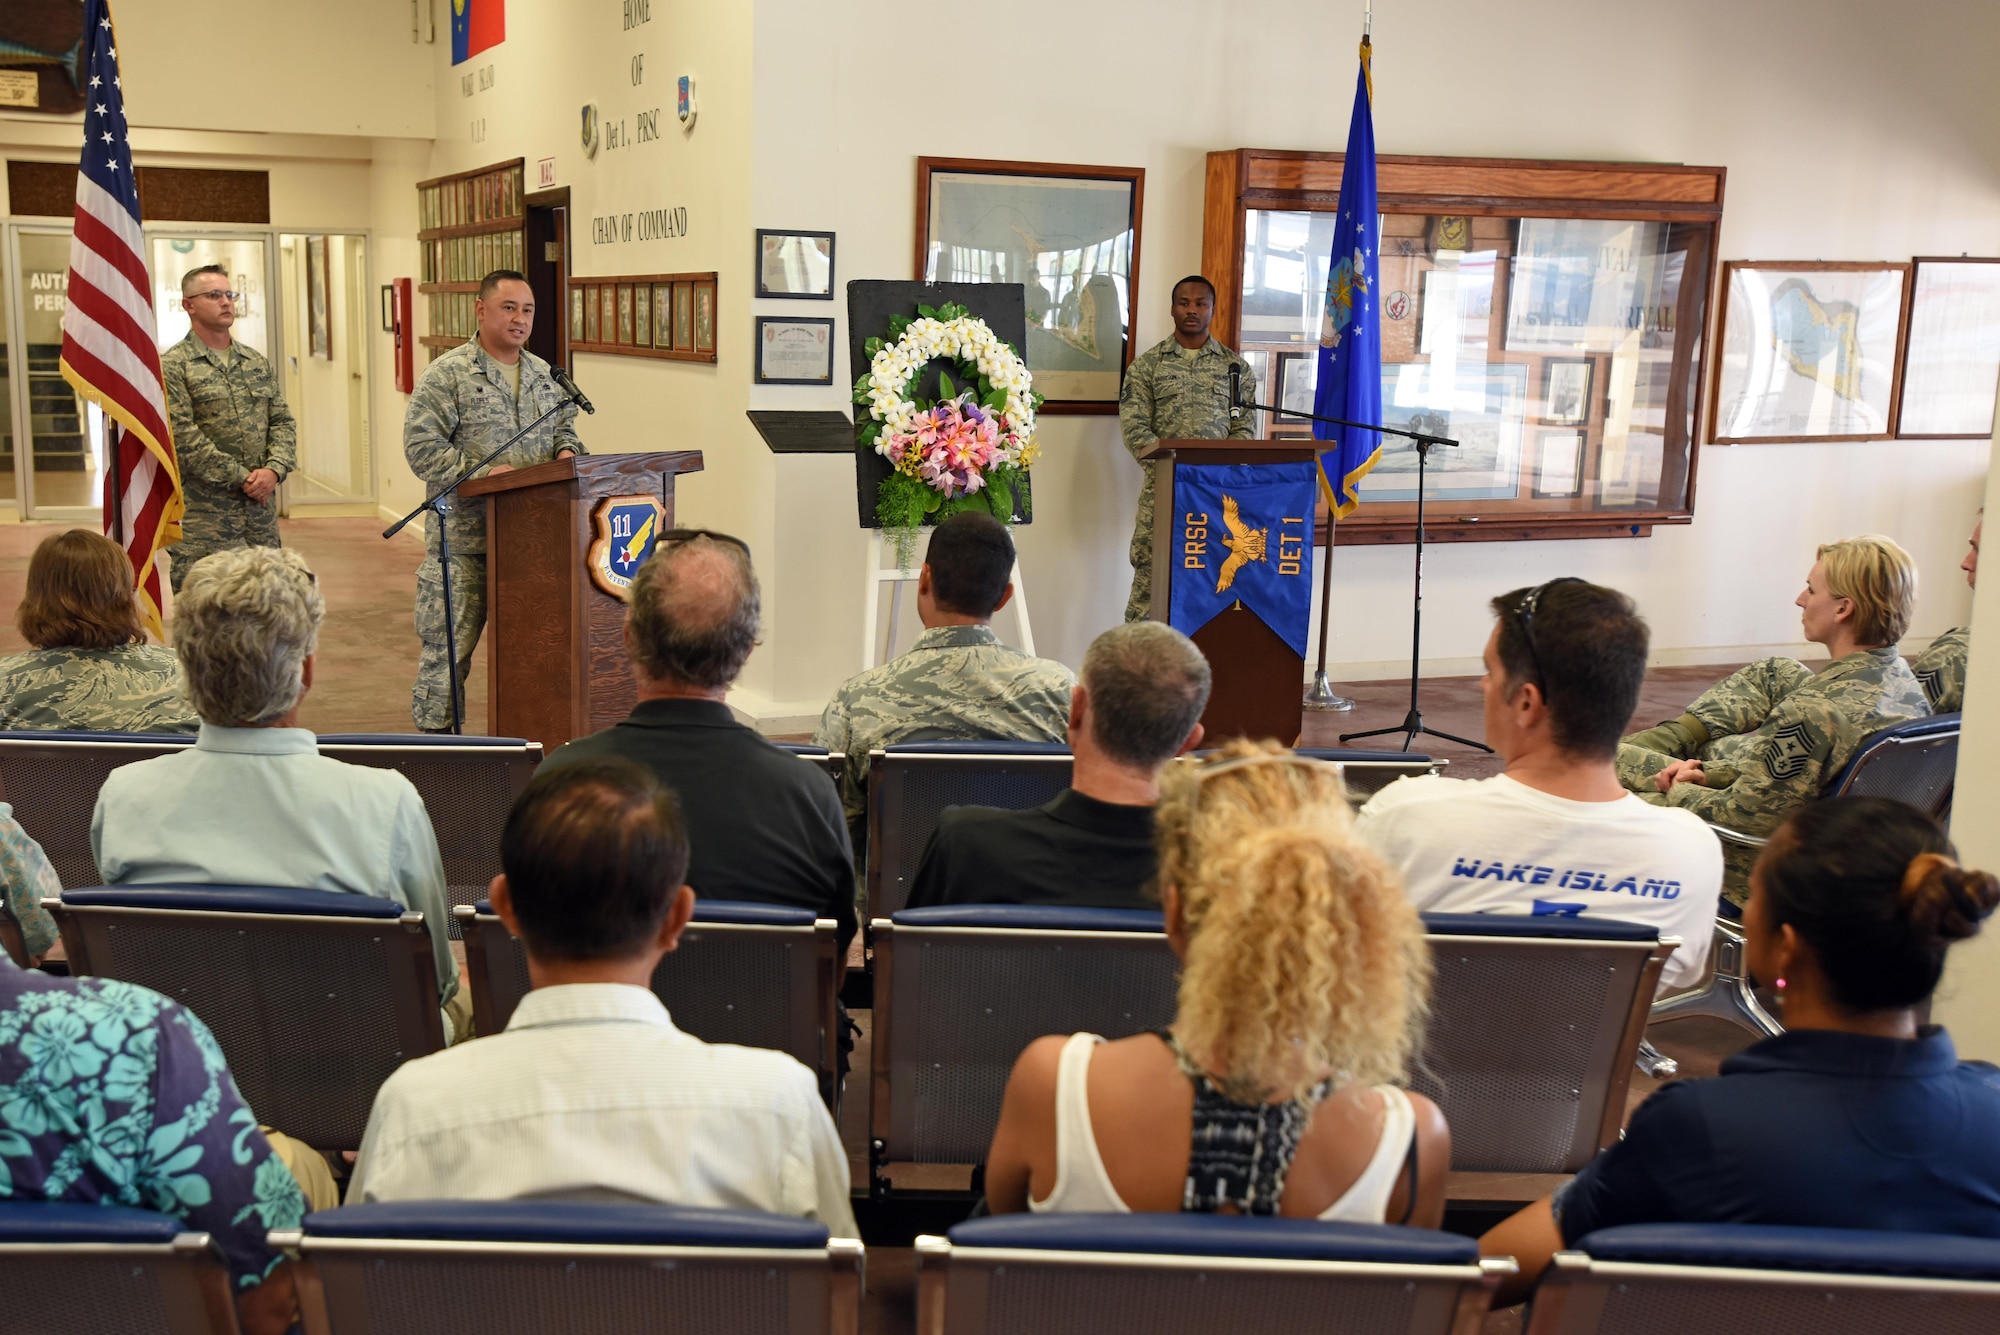 WAKE ISLAND ATOLL-- U.S. Air Force Col. Frank Flores, Pacific Air Forces Regional Support Center commander, speaks to attendees during the Battle of Wake Island 75th anniversary ceremony. The Battle of Wake Island occured just a few hours after the attack on Pearl Harbor, Hawaii, on Dec. 7, 1941. "We honor those brave souls who were lost and those who suffered tremendously," Flores said. "We carry on the tradition of service, dedication and courage through our actions on this island today." (U.S. Air Force photo/Tech. Sgt. John Gordinier)